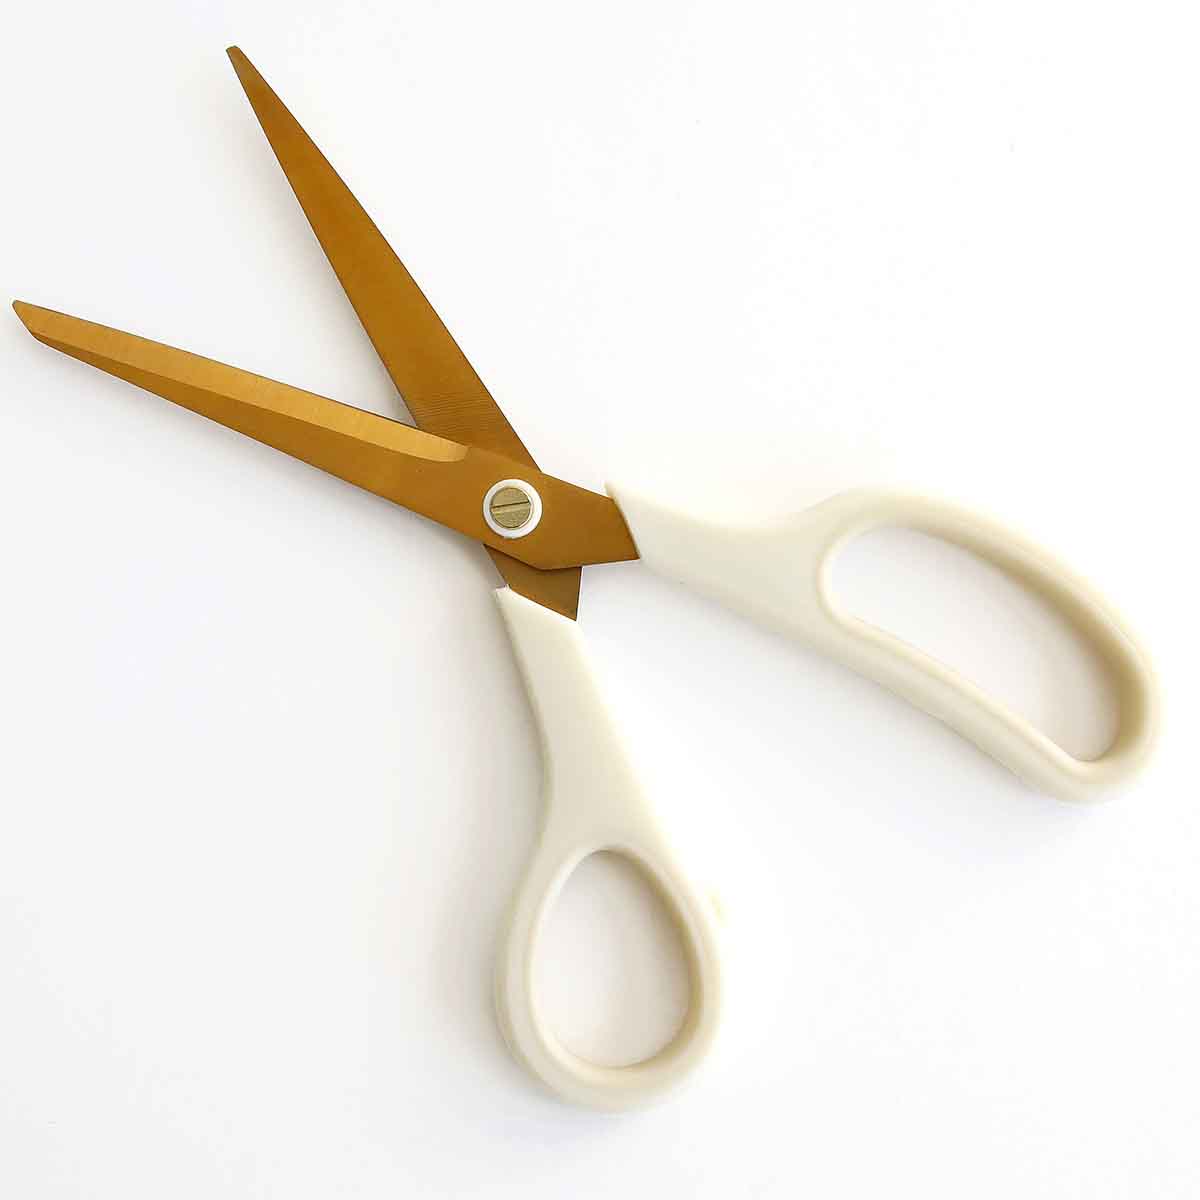 a pair of scissors sitting on top of a table.